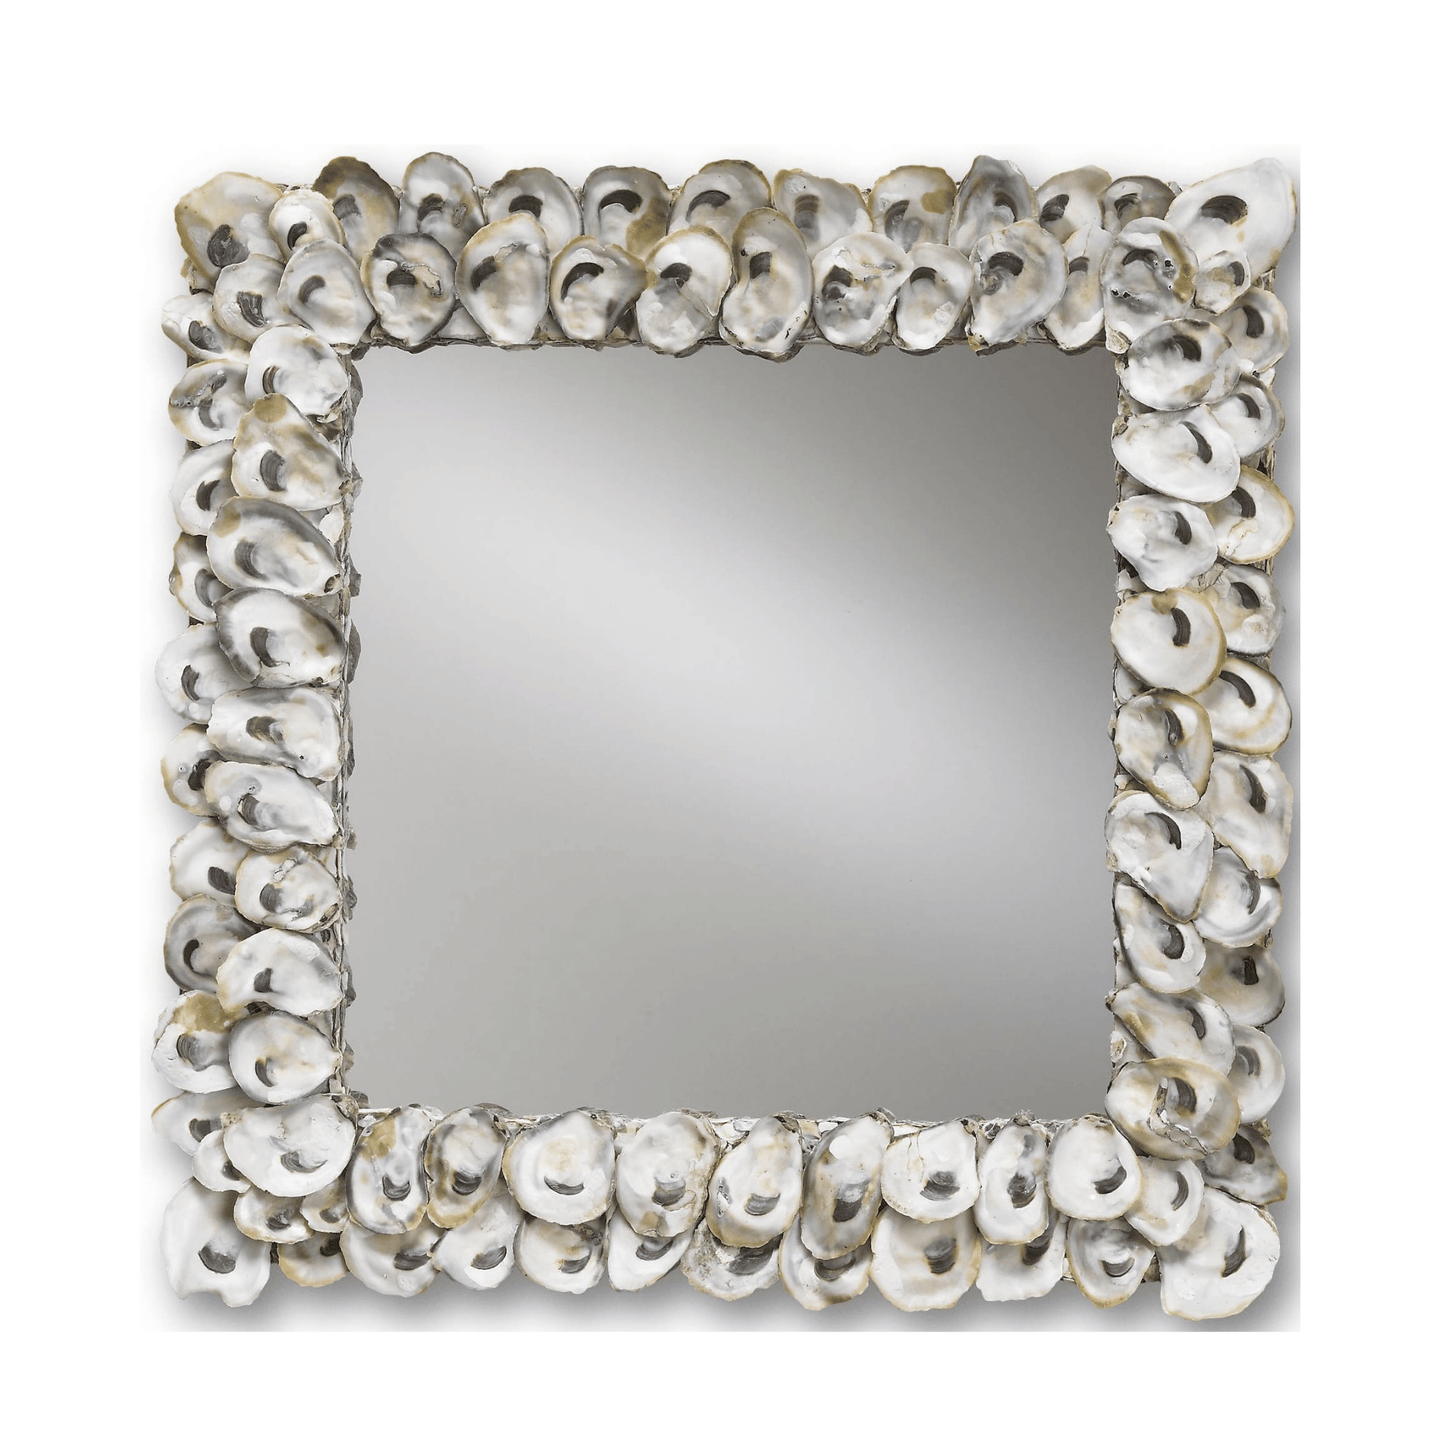 Oyster Shell Mirror H: 20" W: 20" D: 2"